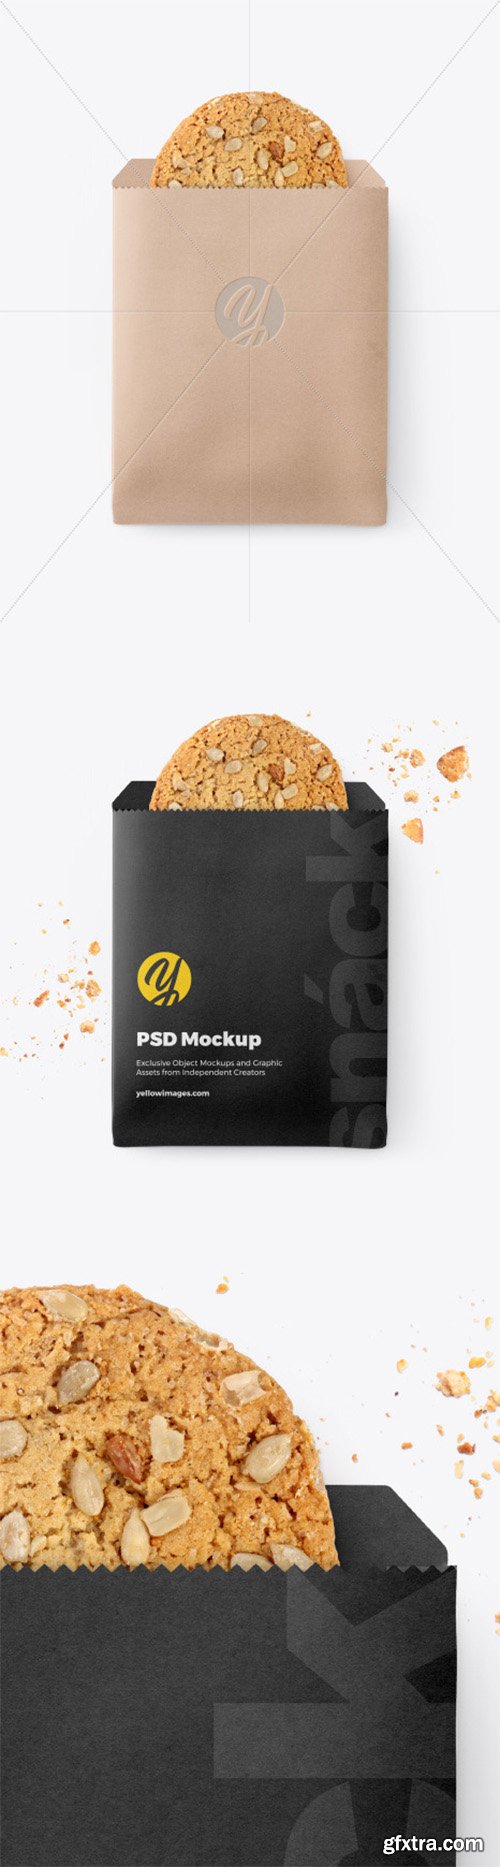 Paper Snack Pack Mockup 52022 Gfxtra